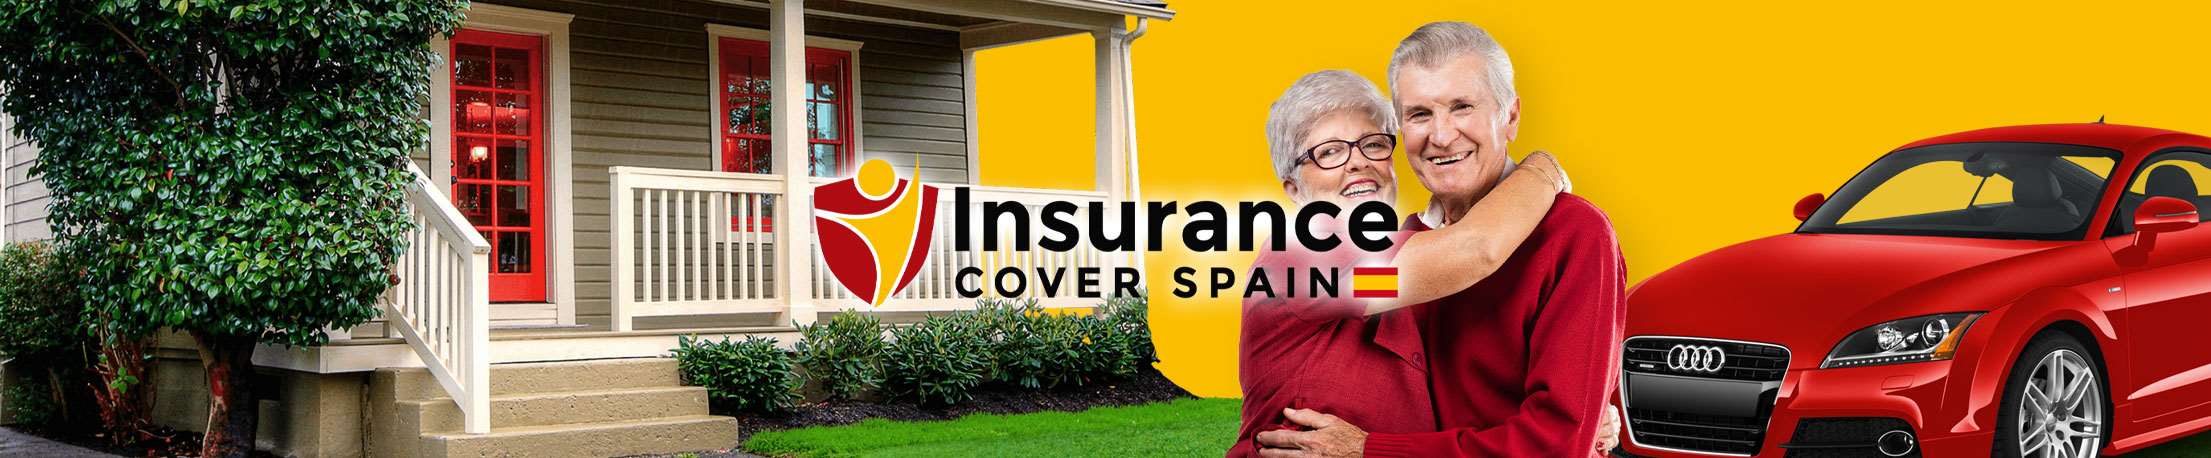 Co-Founder of Insurance Cover Spain